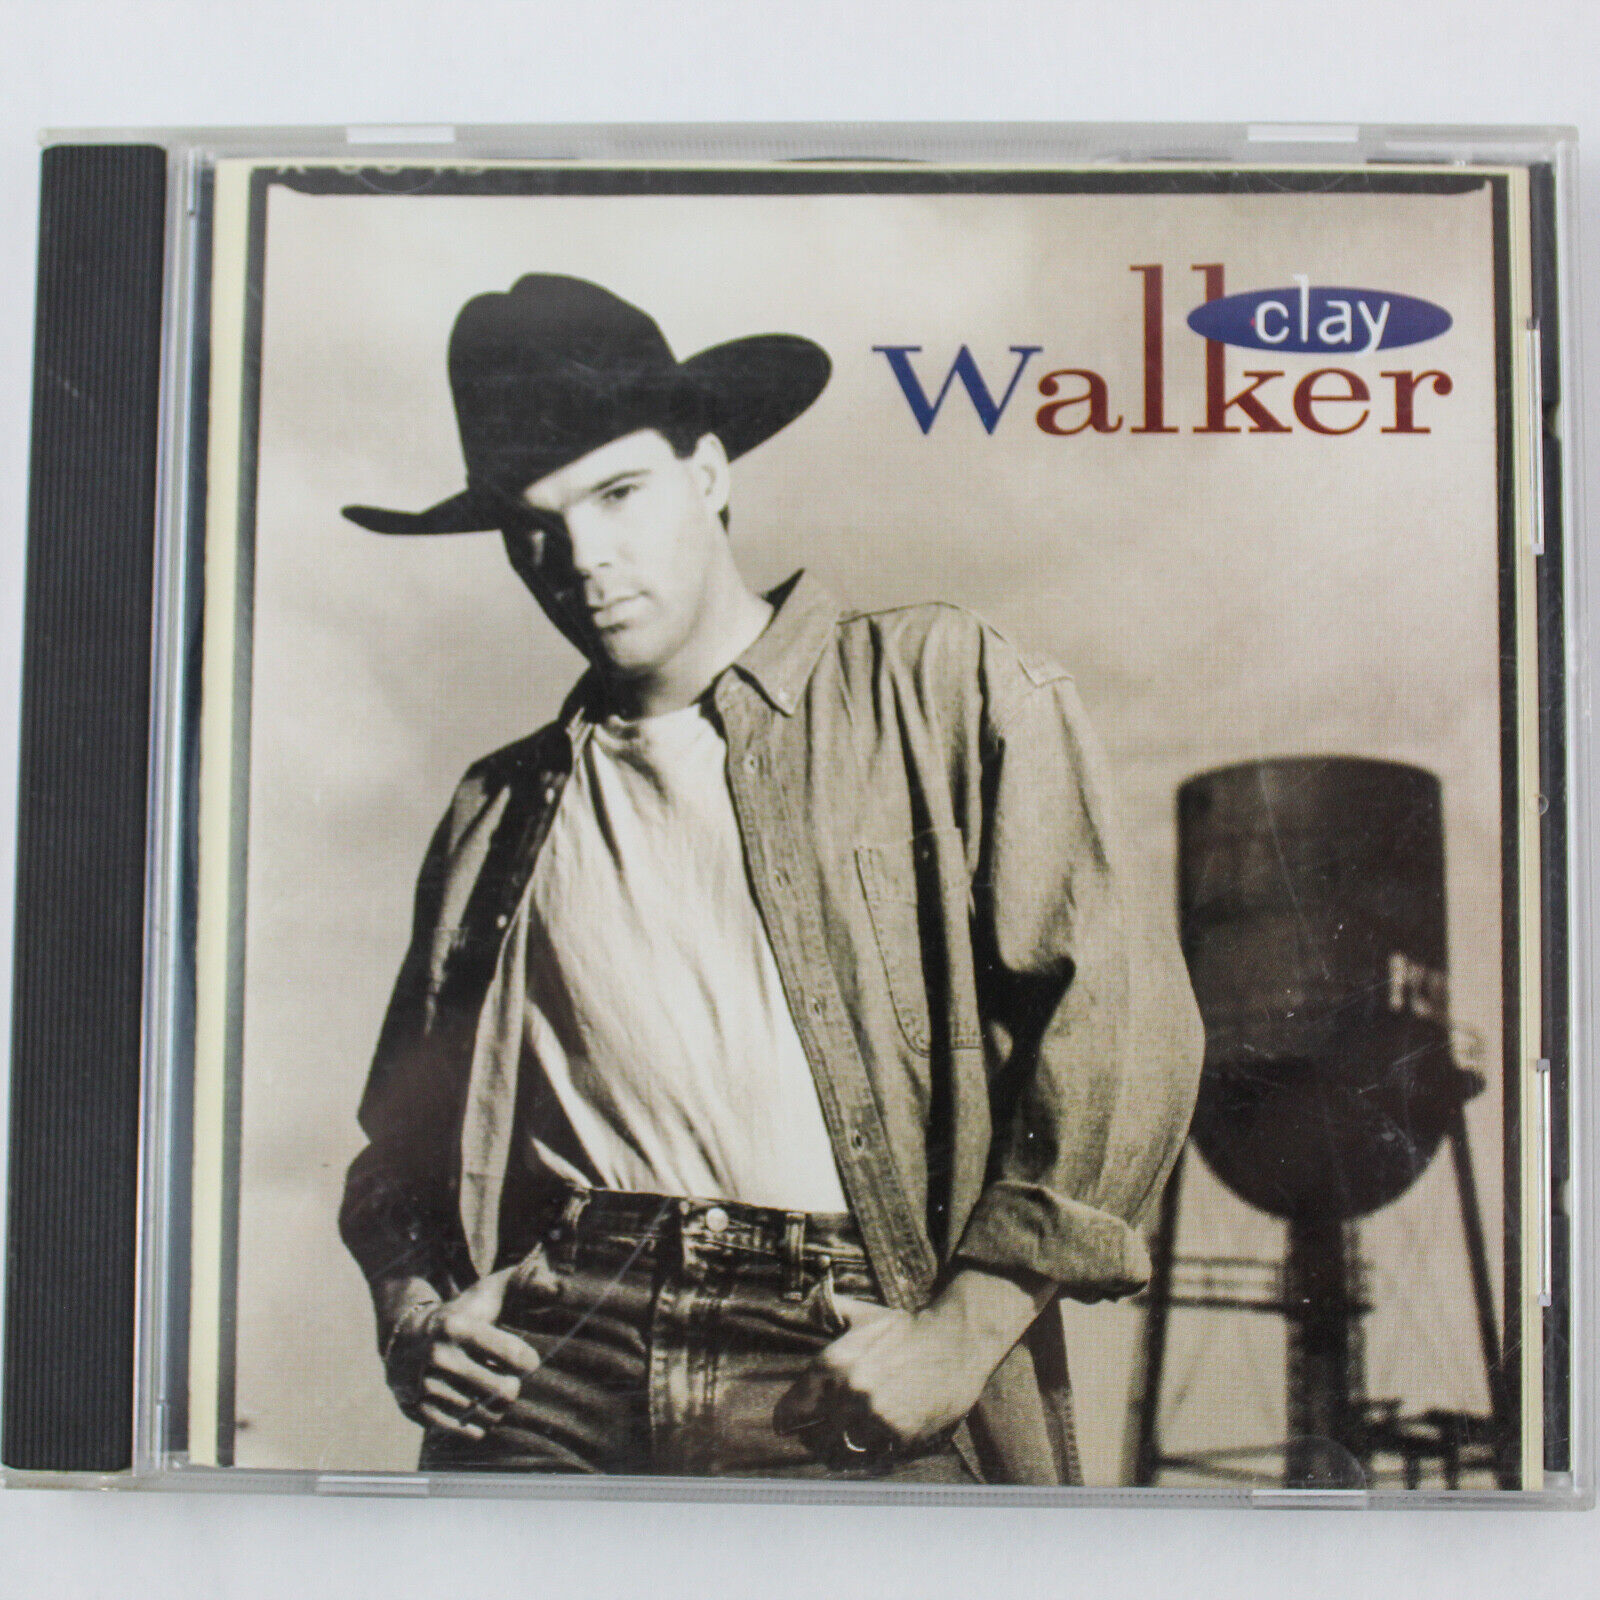 Clay Walker Audio Music CD Disc Jewel Case 1993 Giant Records